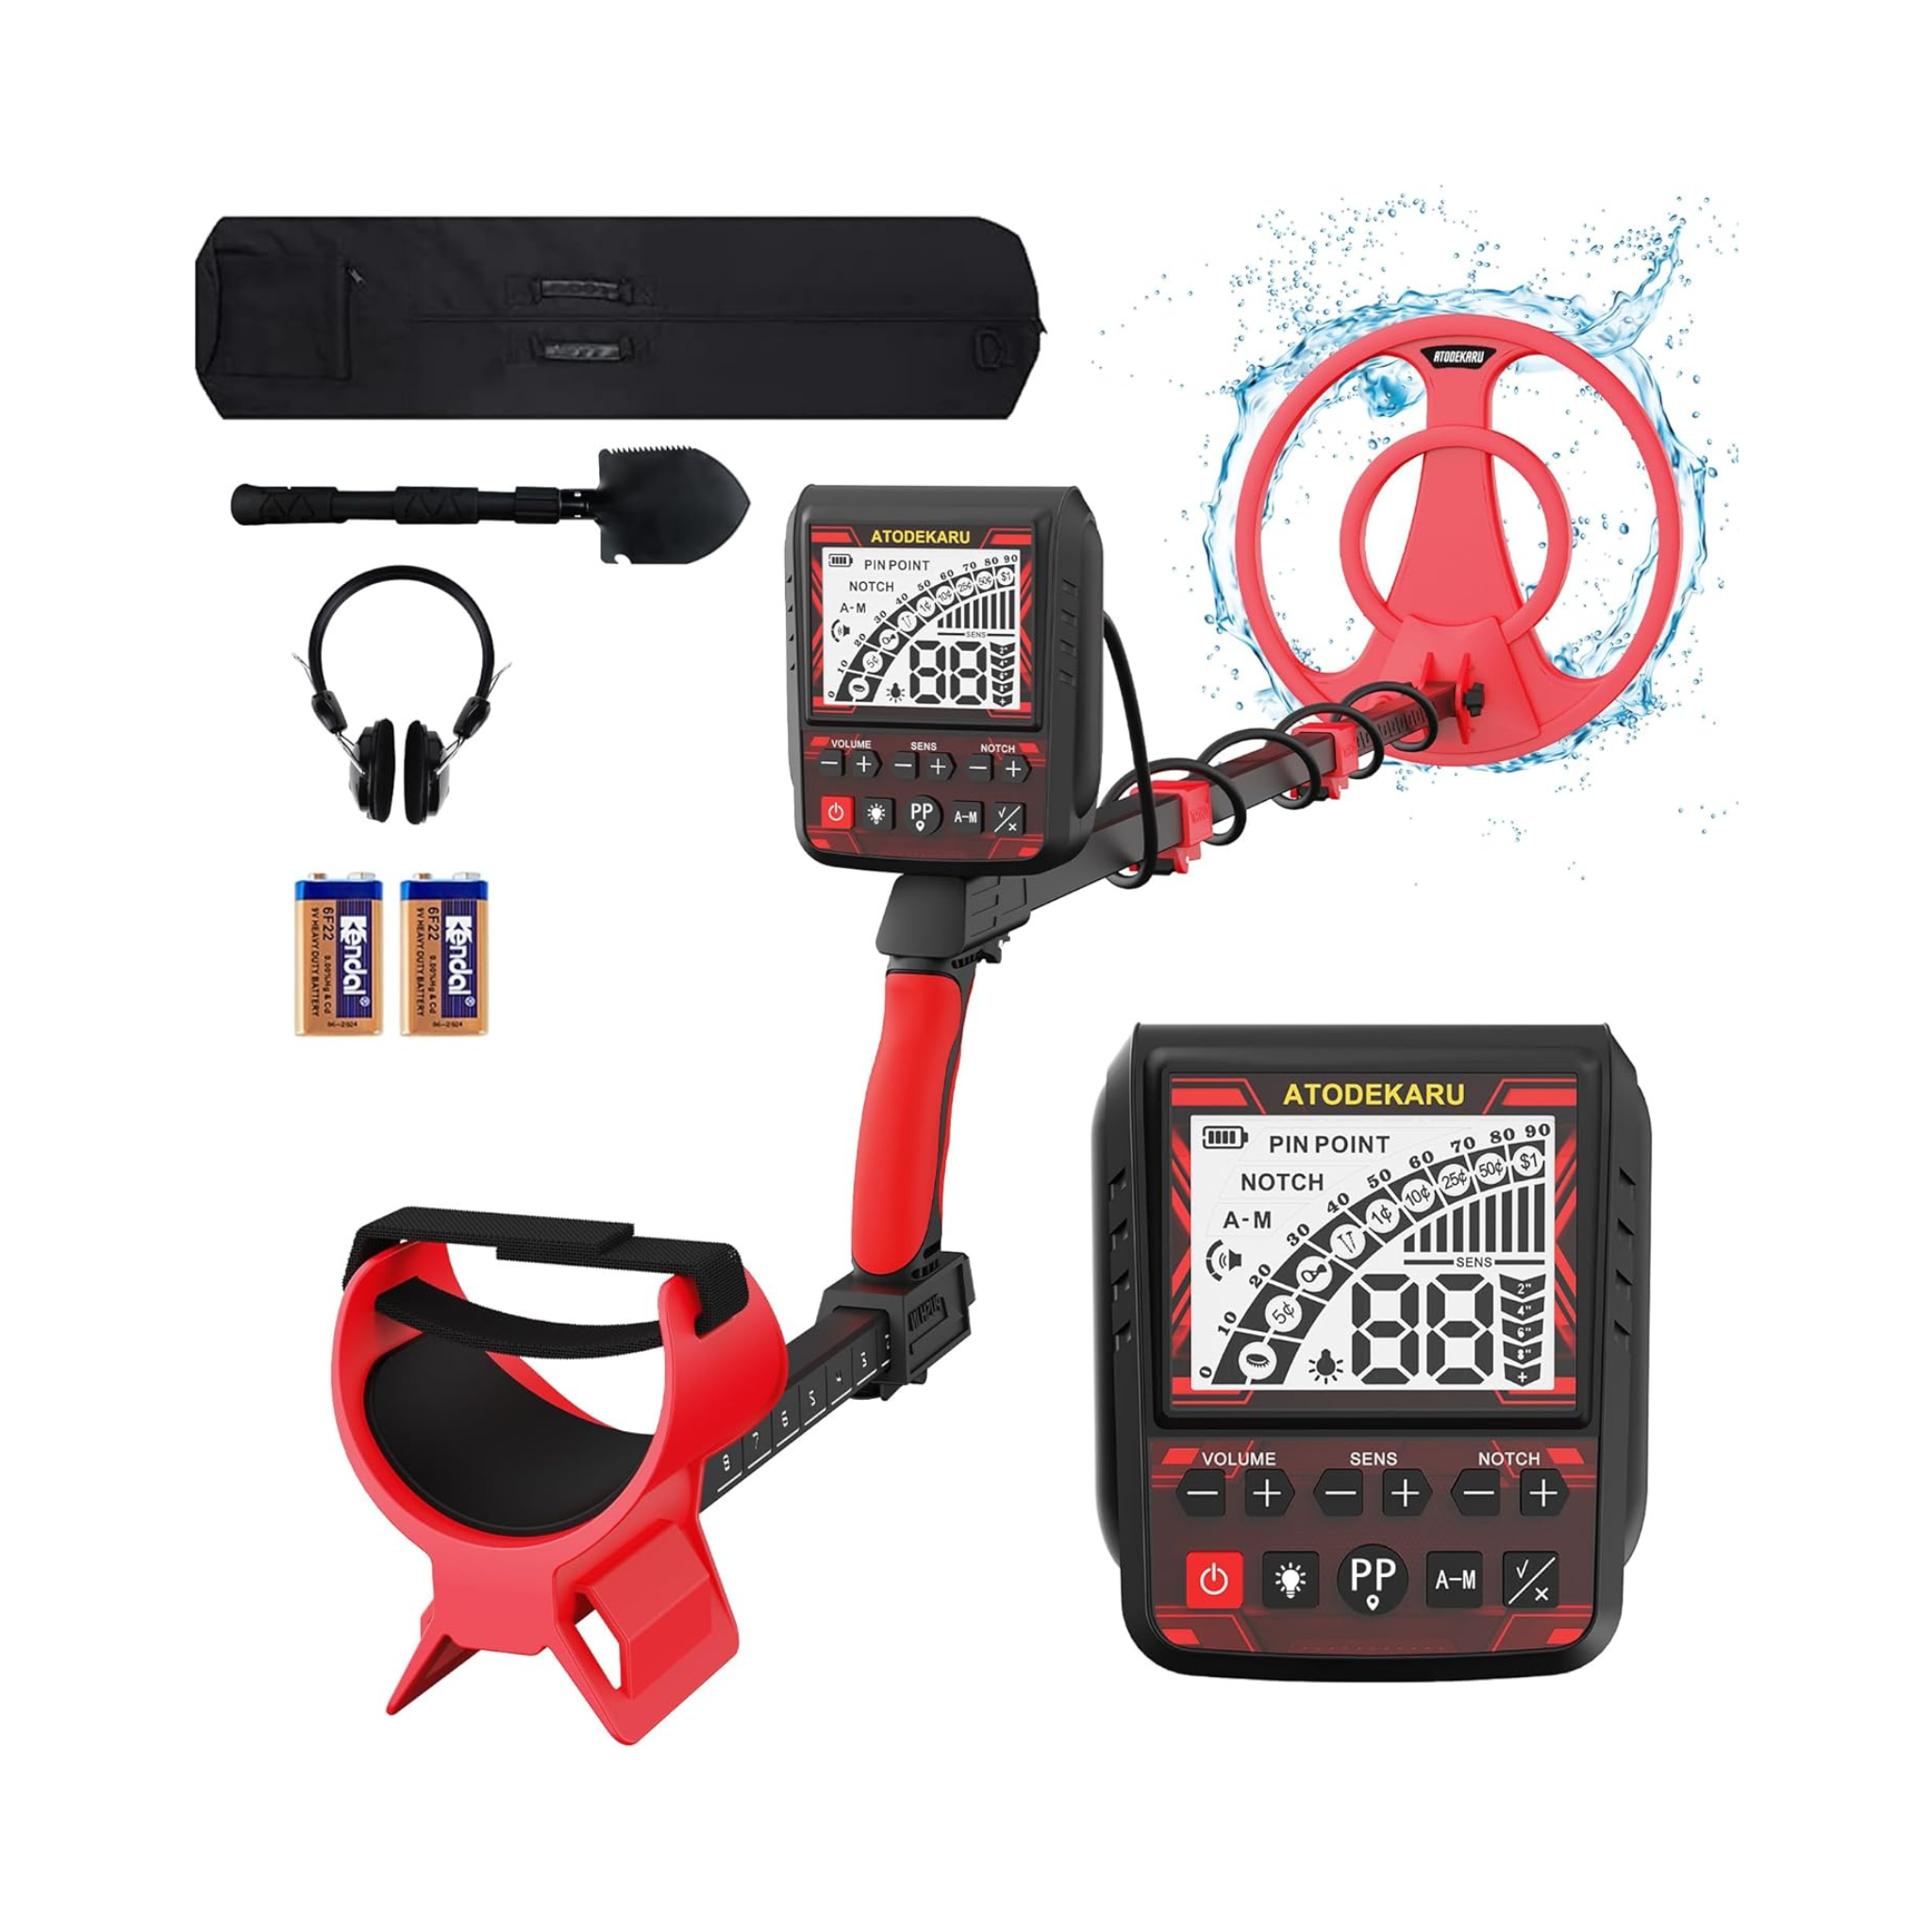 Atodekaru Professional Higher Accuracy Metal Detector with LCD Display